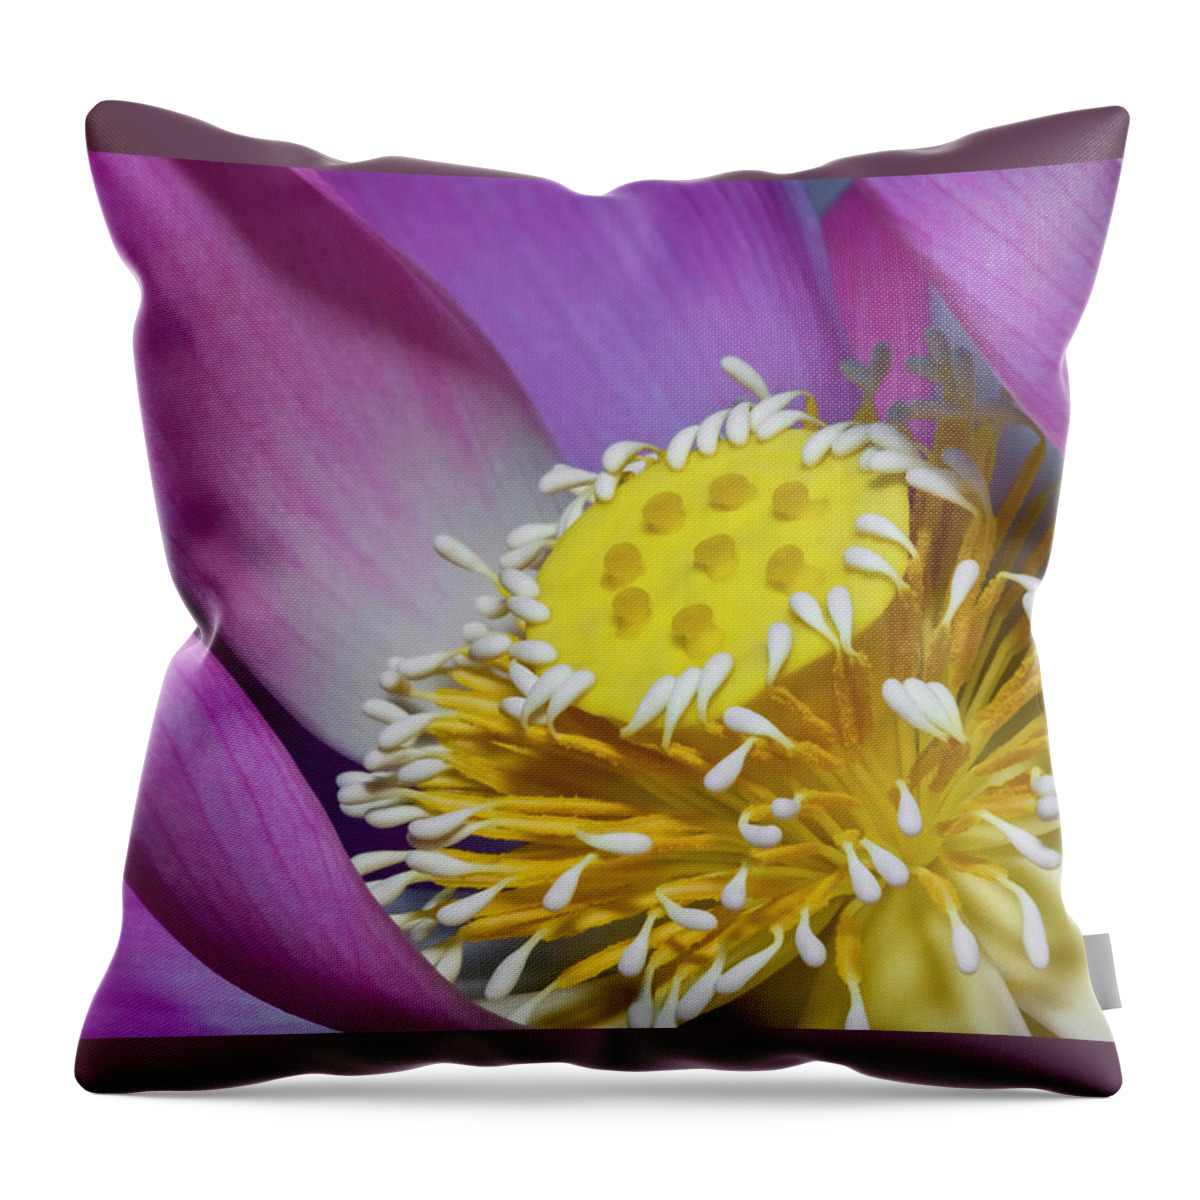 Lotus Throw Pillow featuring the photograph Lotus 1 by Tanya G Burnett